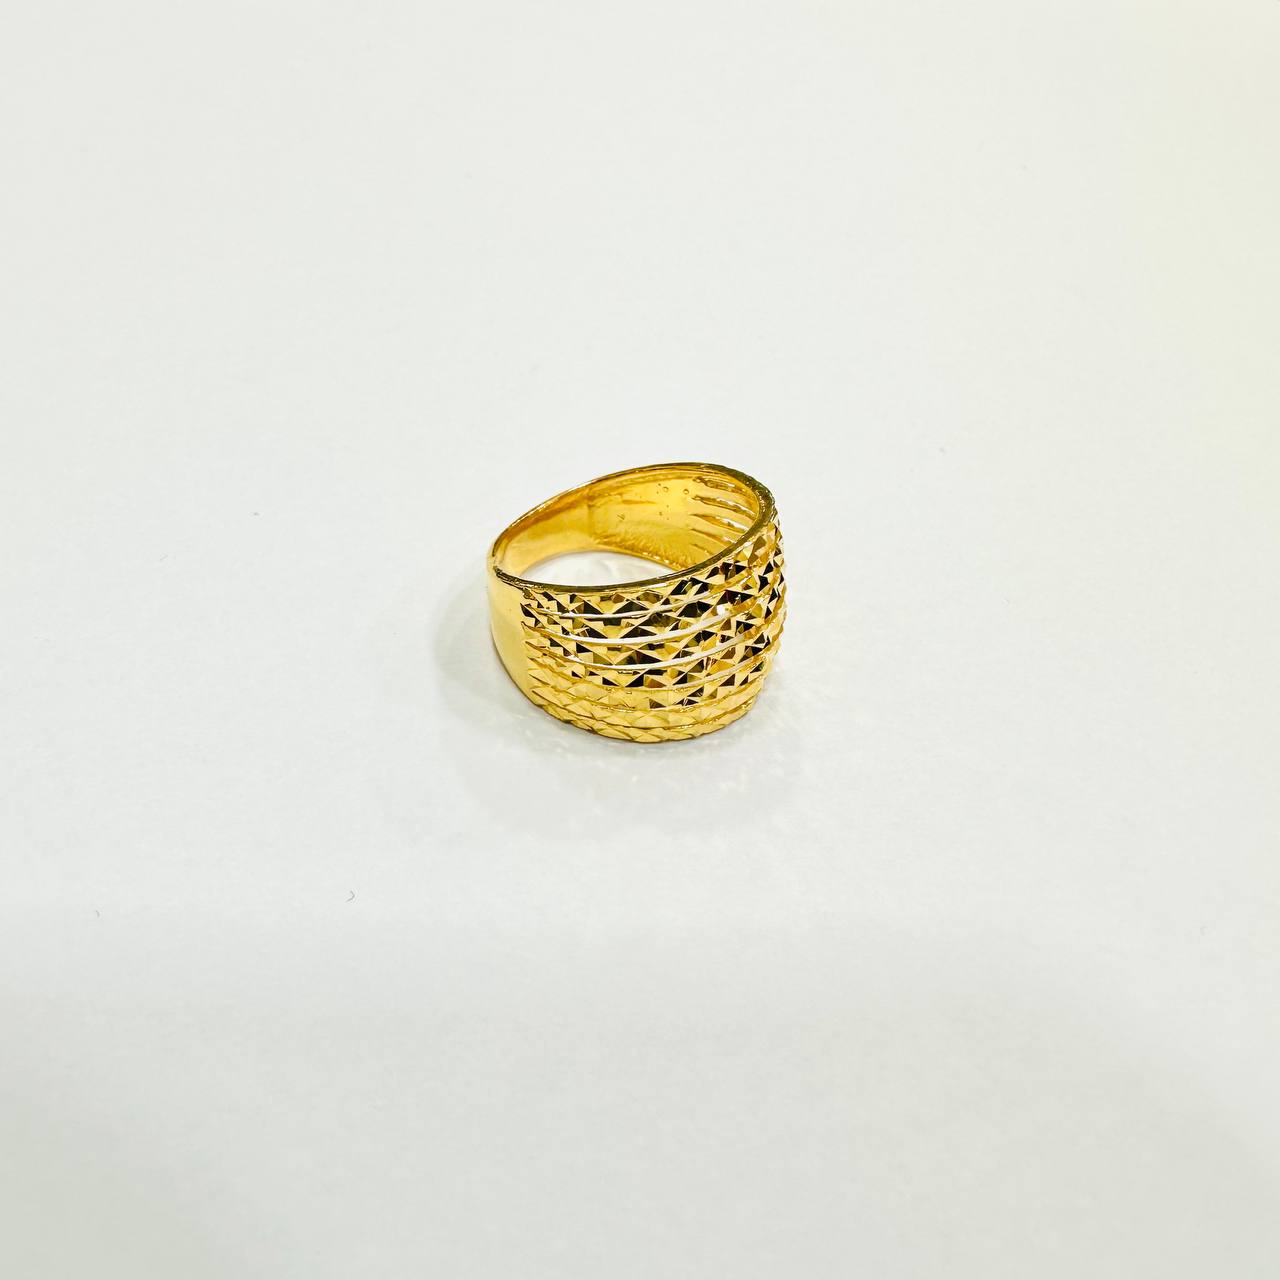 22k / 916 Gold Wide cutting ring (Very Wide)-916 gold-Best Gold Shop